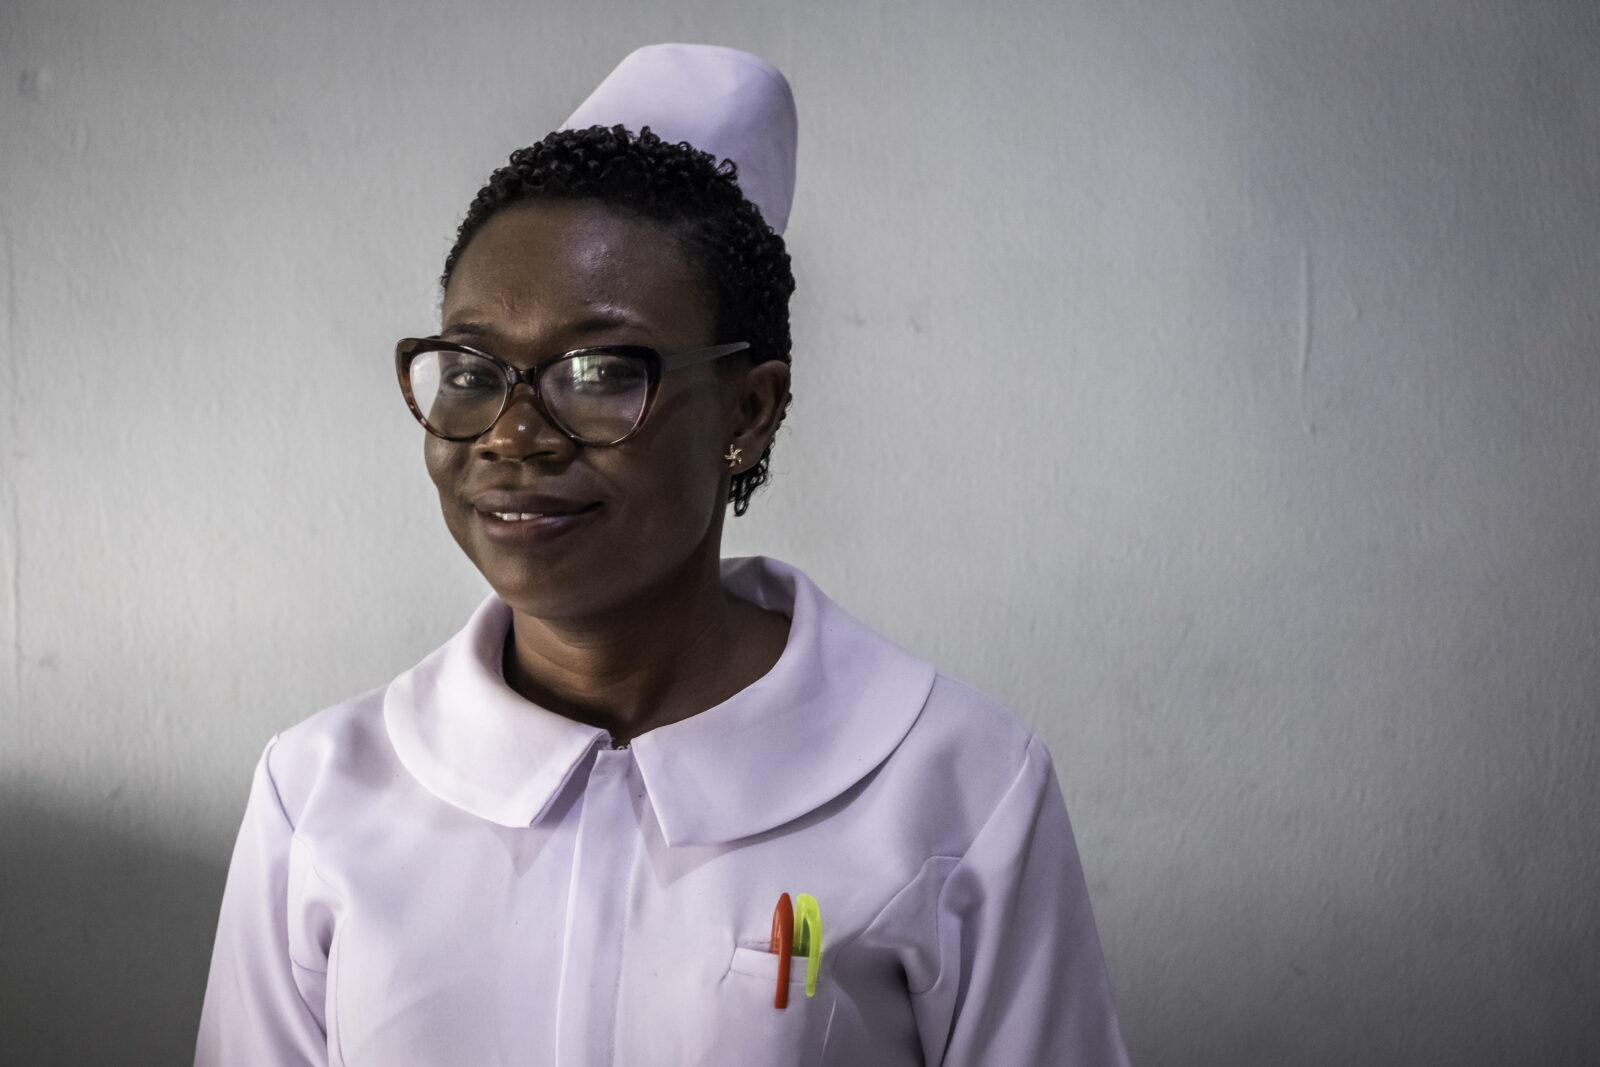 Queen Ohaka, a nurse, poses for a photograph in Rivers State Uuniversity Teaching Hospital, Port Harcourt Rivers State, Nigeria